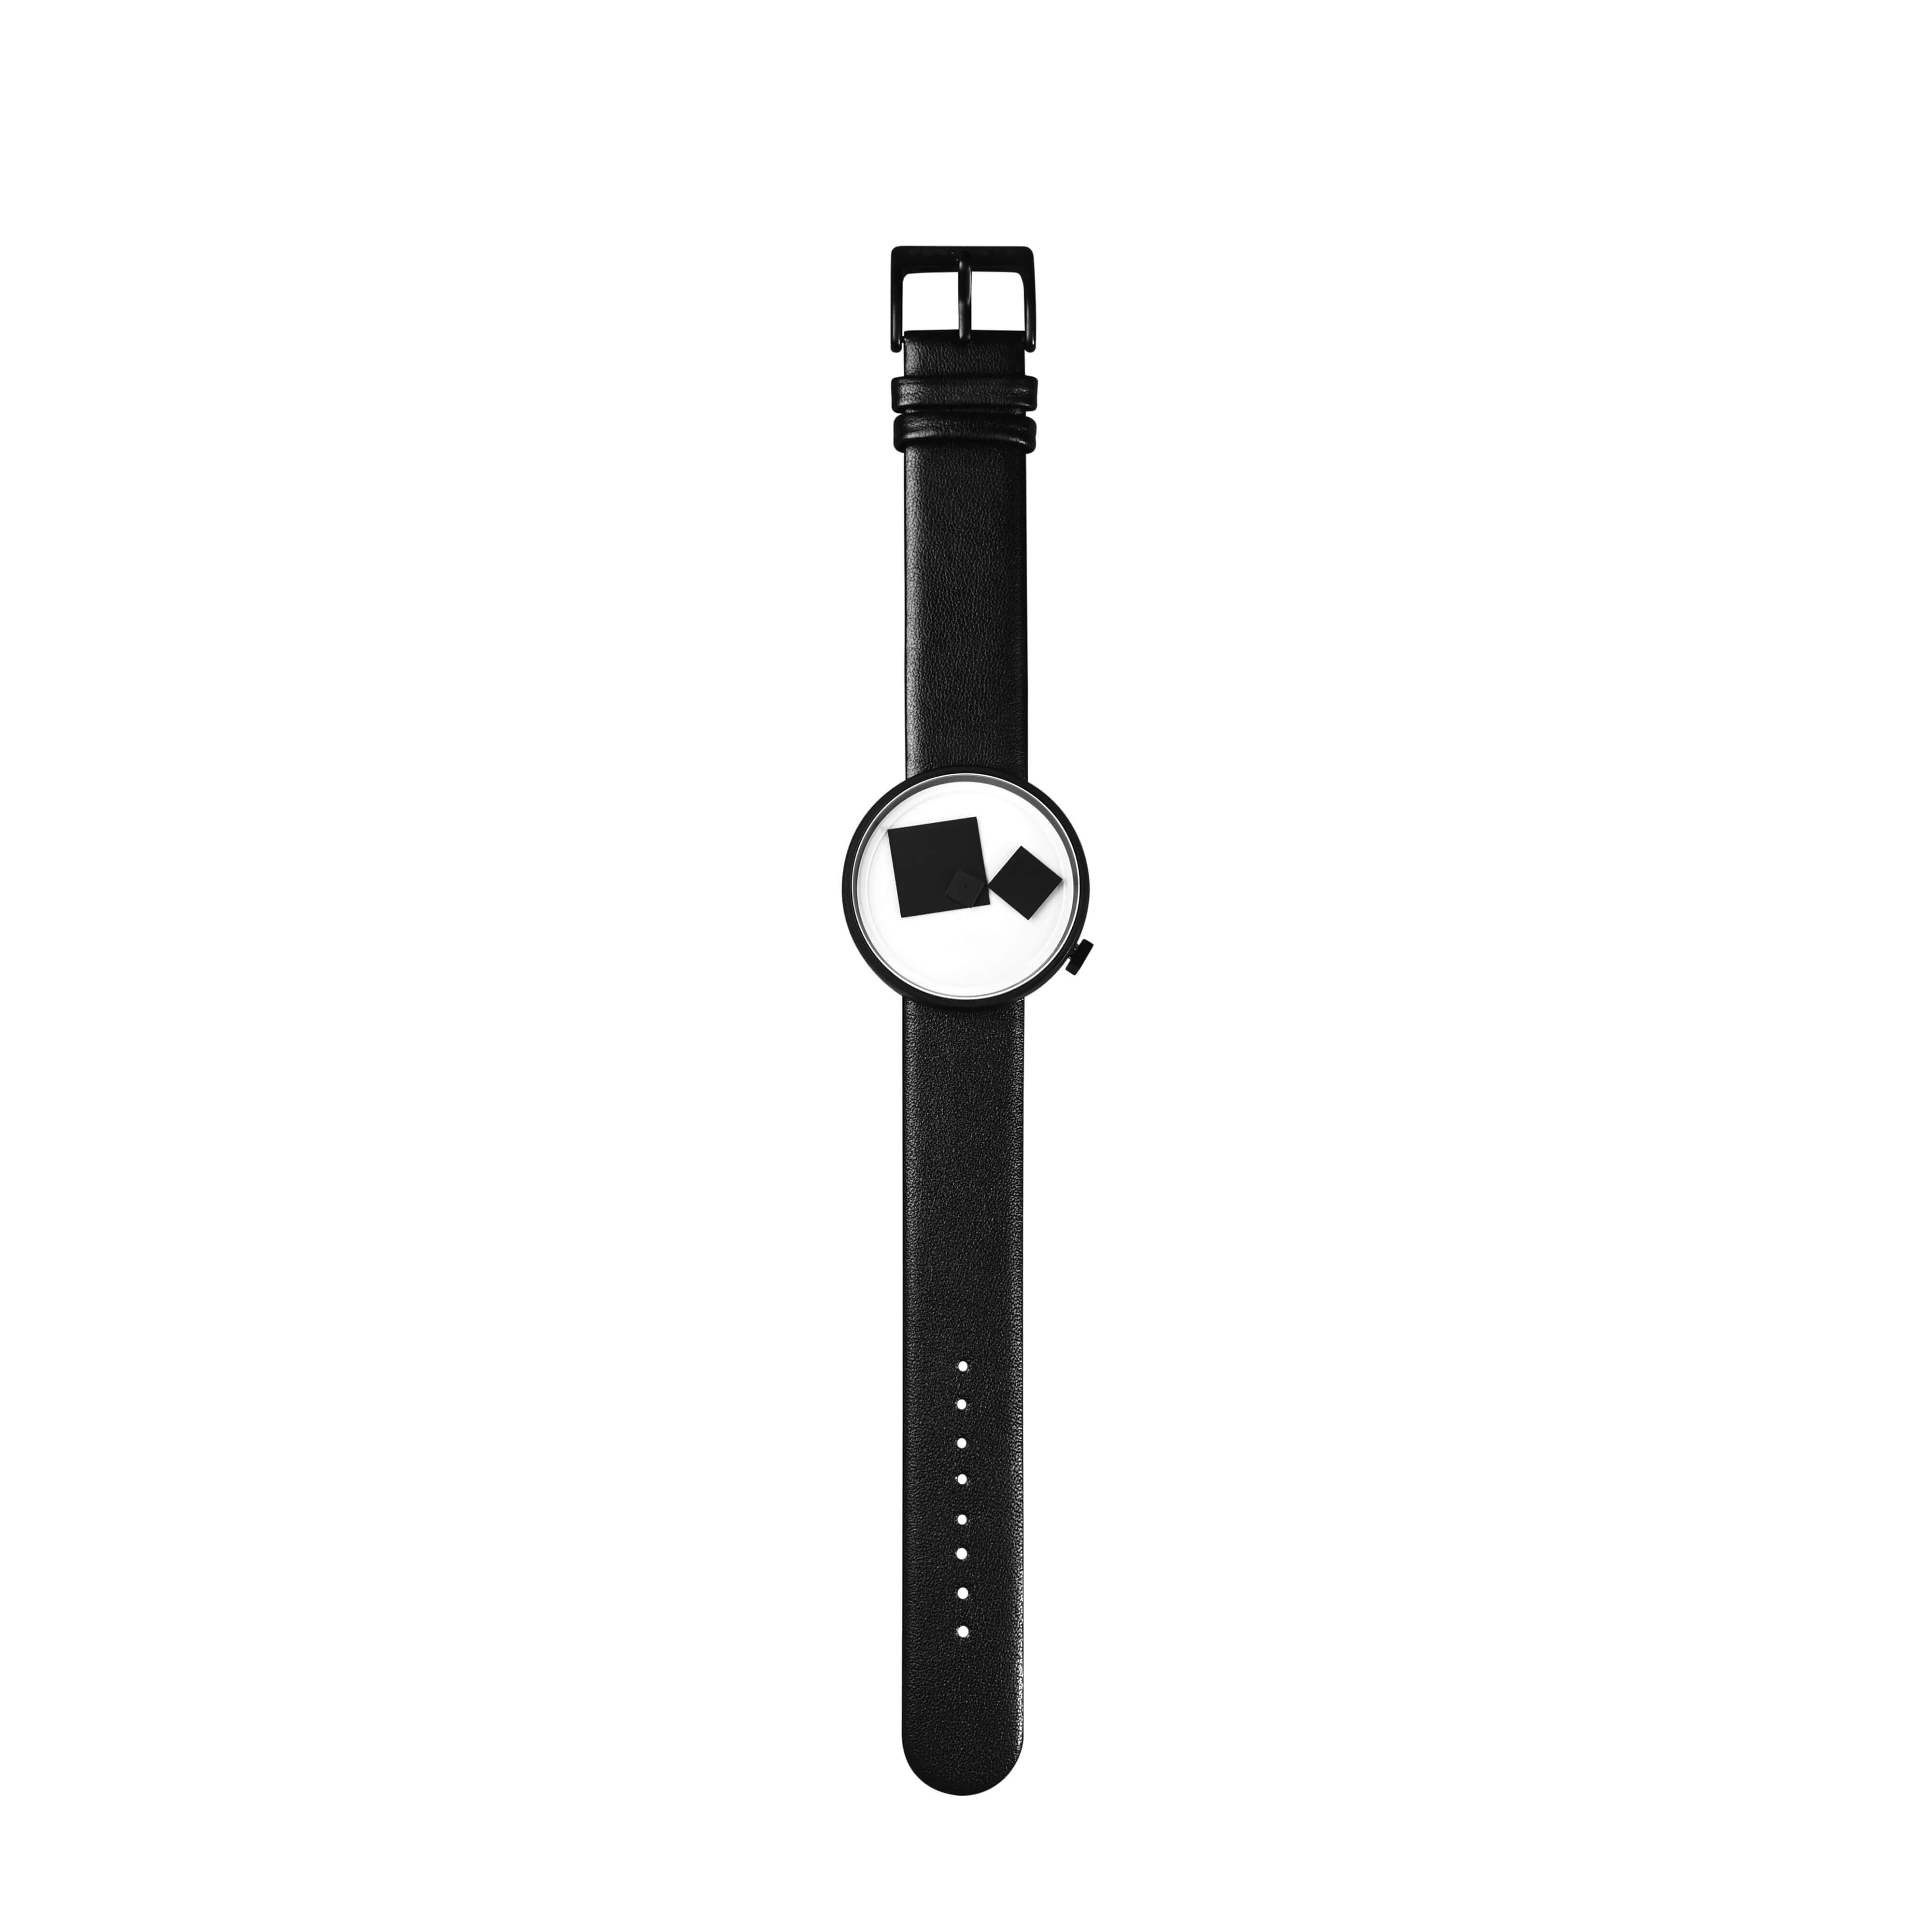 Bauhaus Black - Projects Watches